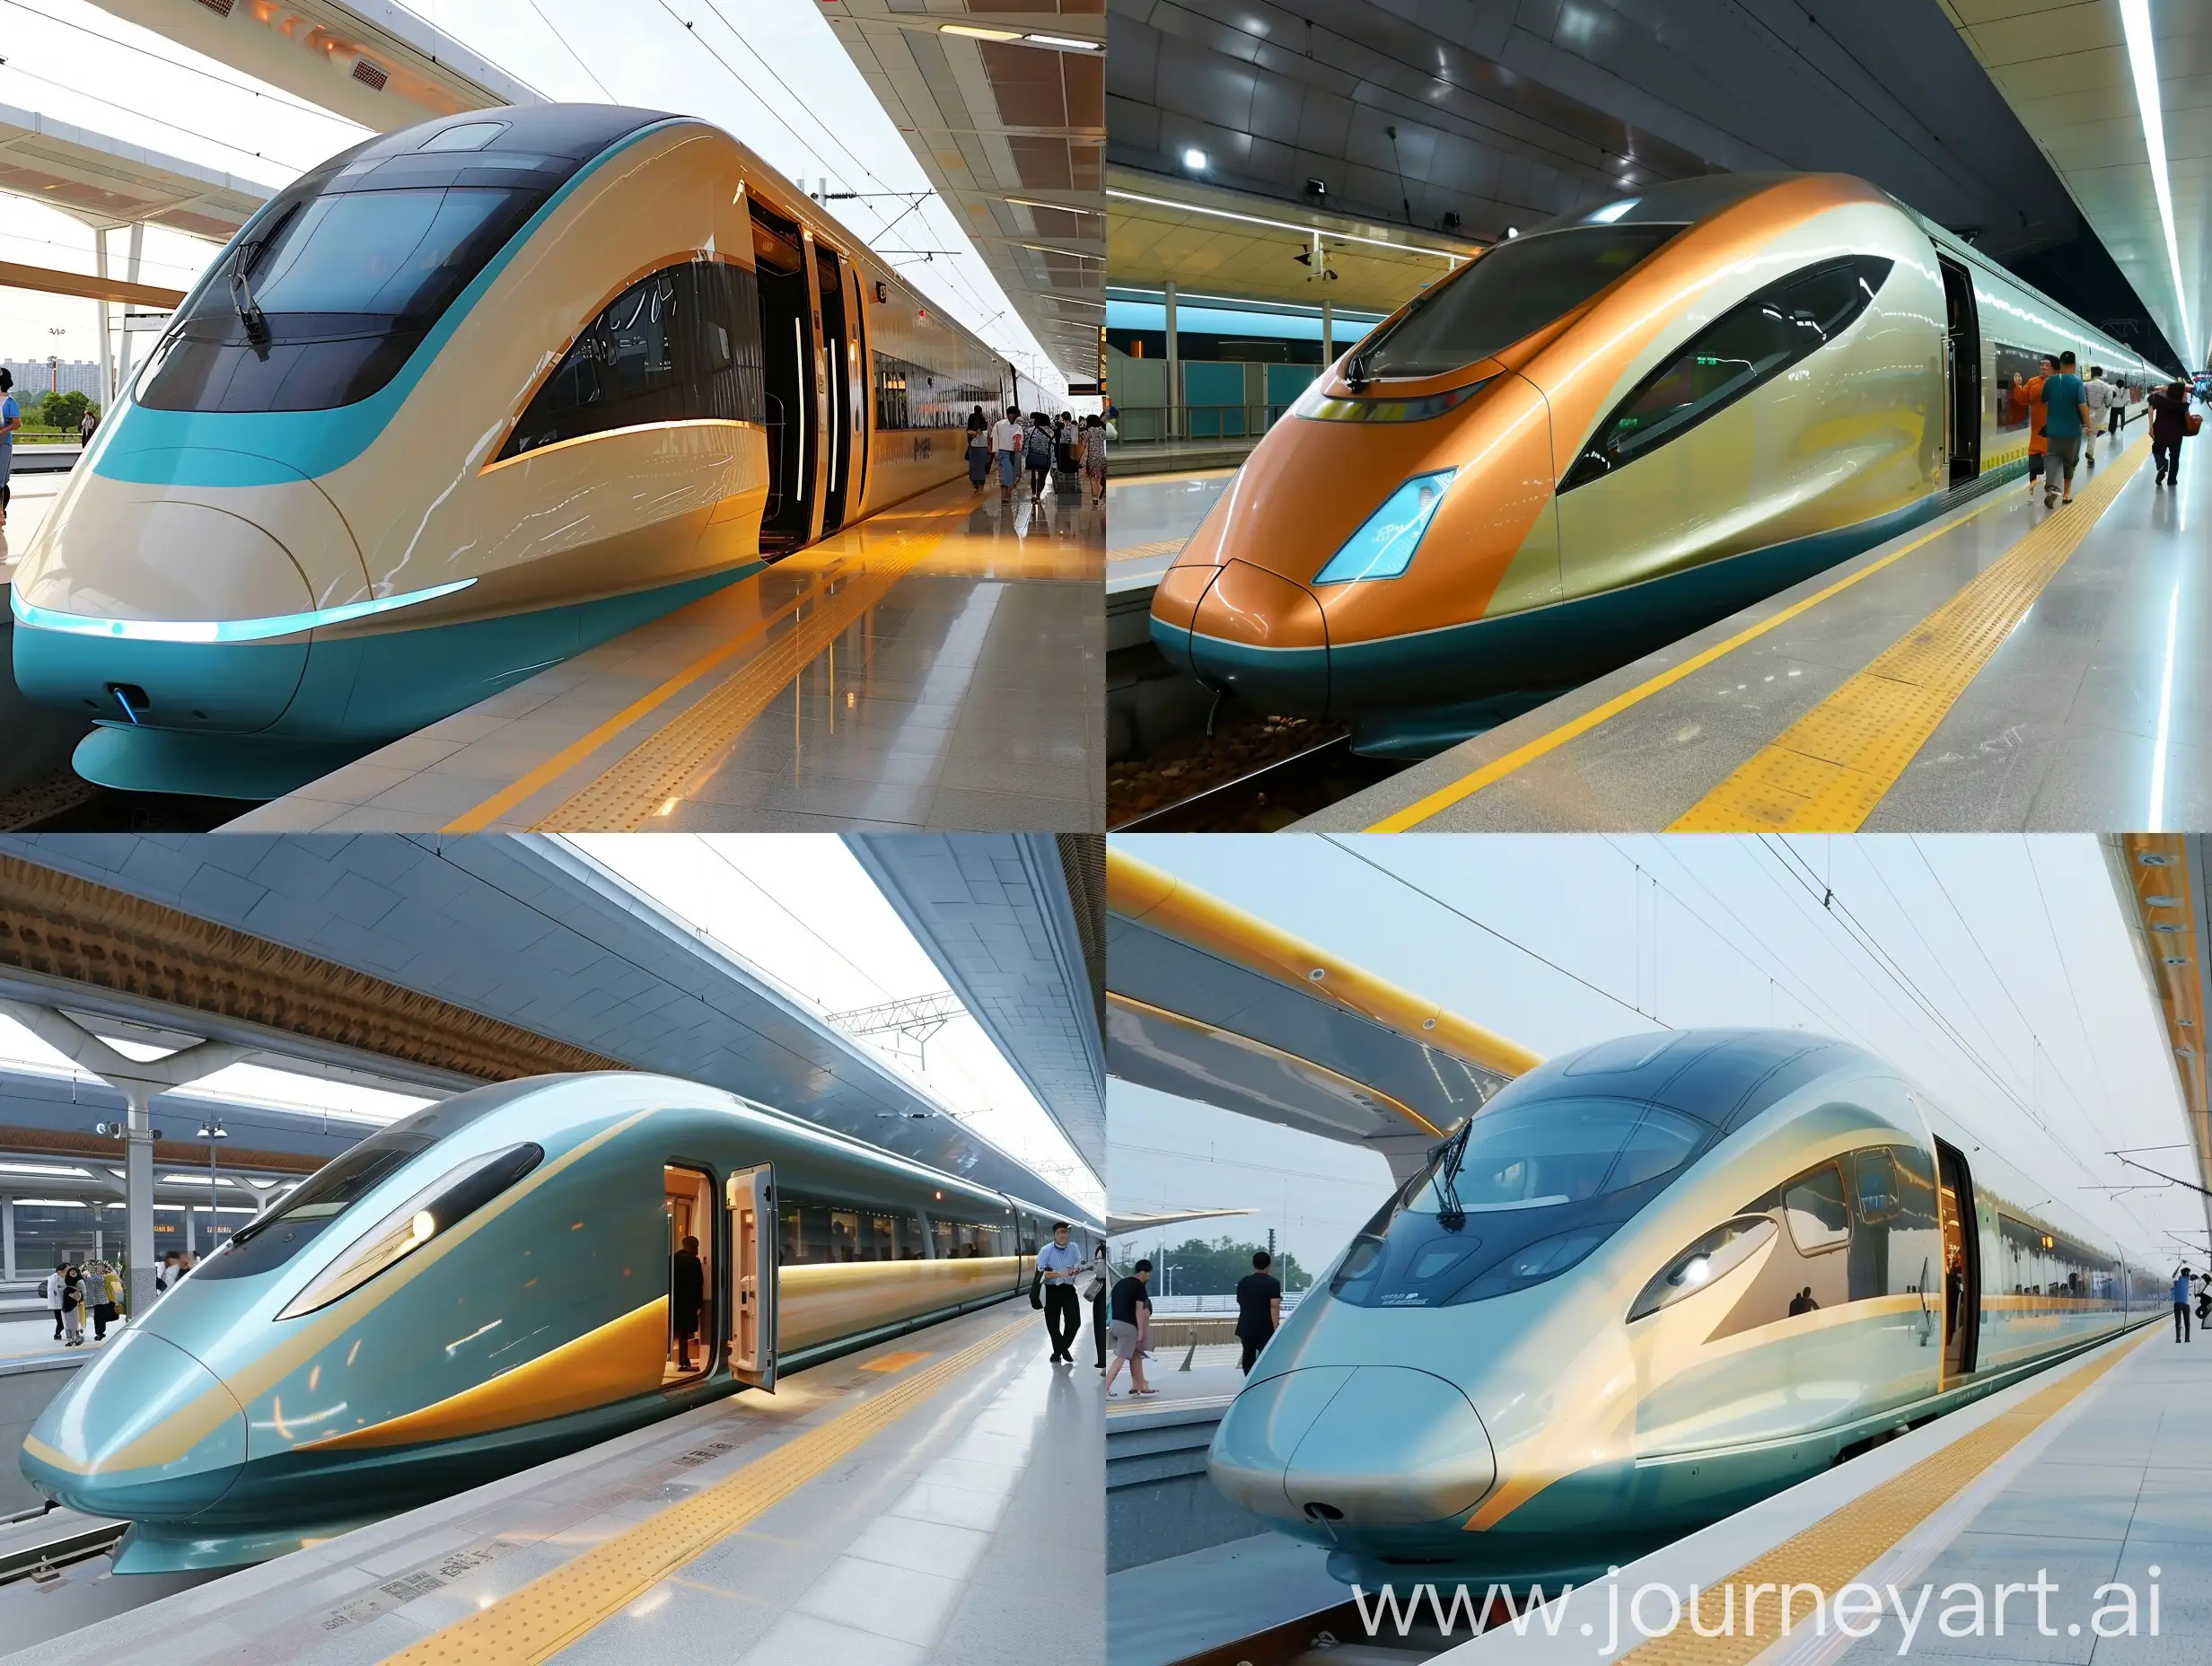 Futuristic-HighSpeed-Train-Station-with-Boarding-Passengers